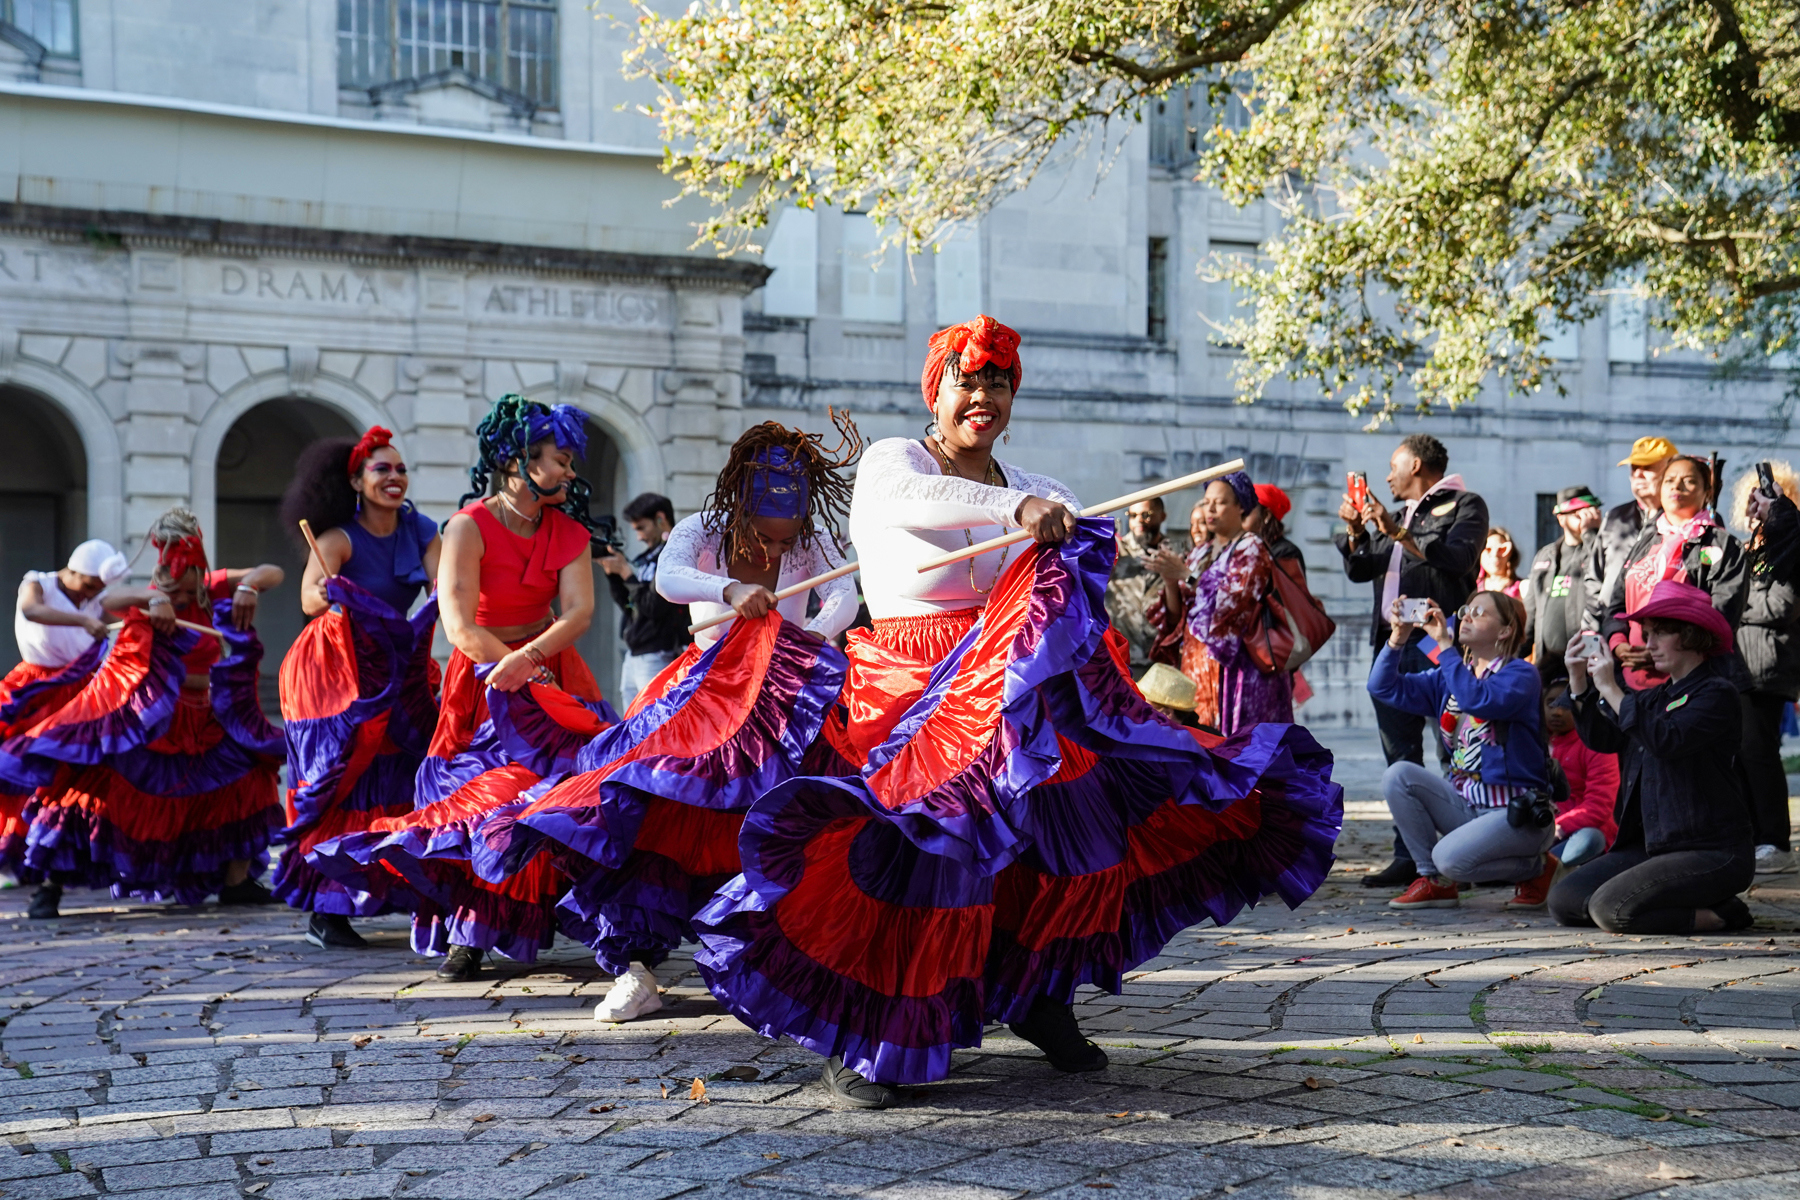 Street dancing in colorful costumes with standersby taking photos